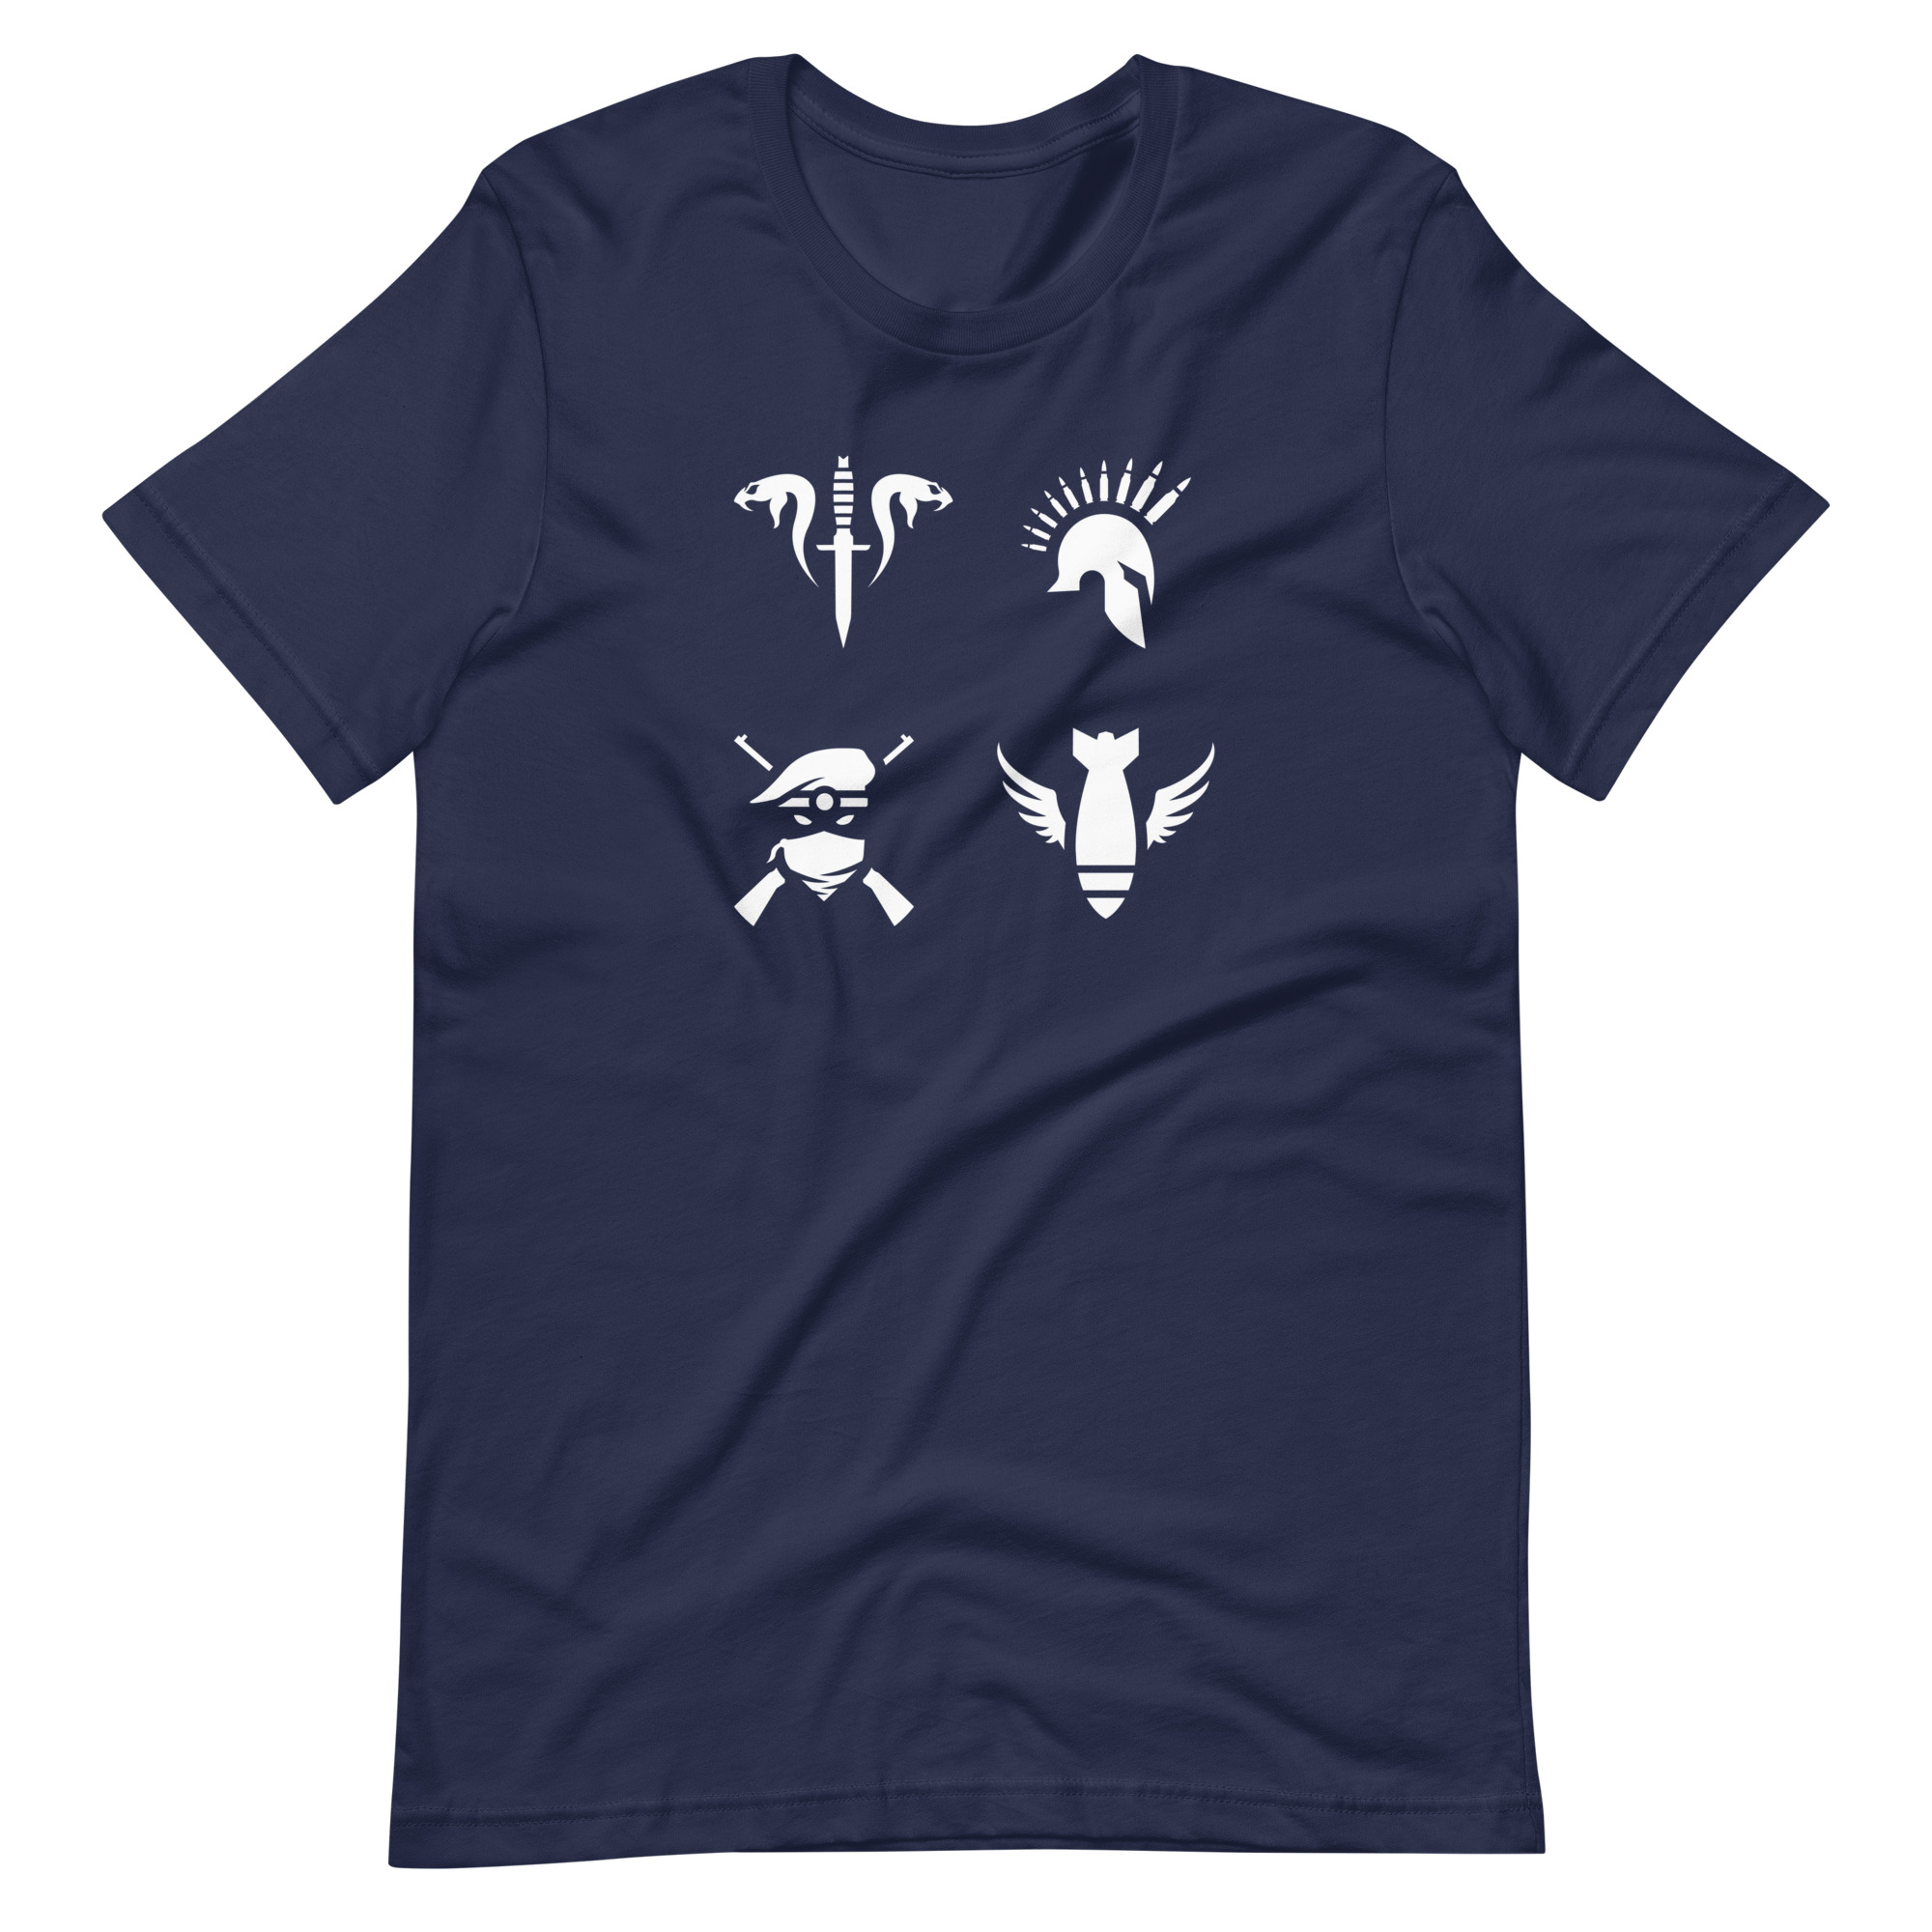 Image of a Navy coloured t-shirt featuring icons of the 4 Sniper Elite 5 multiplayer factions